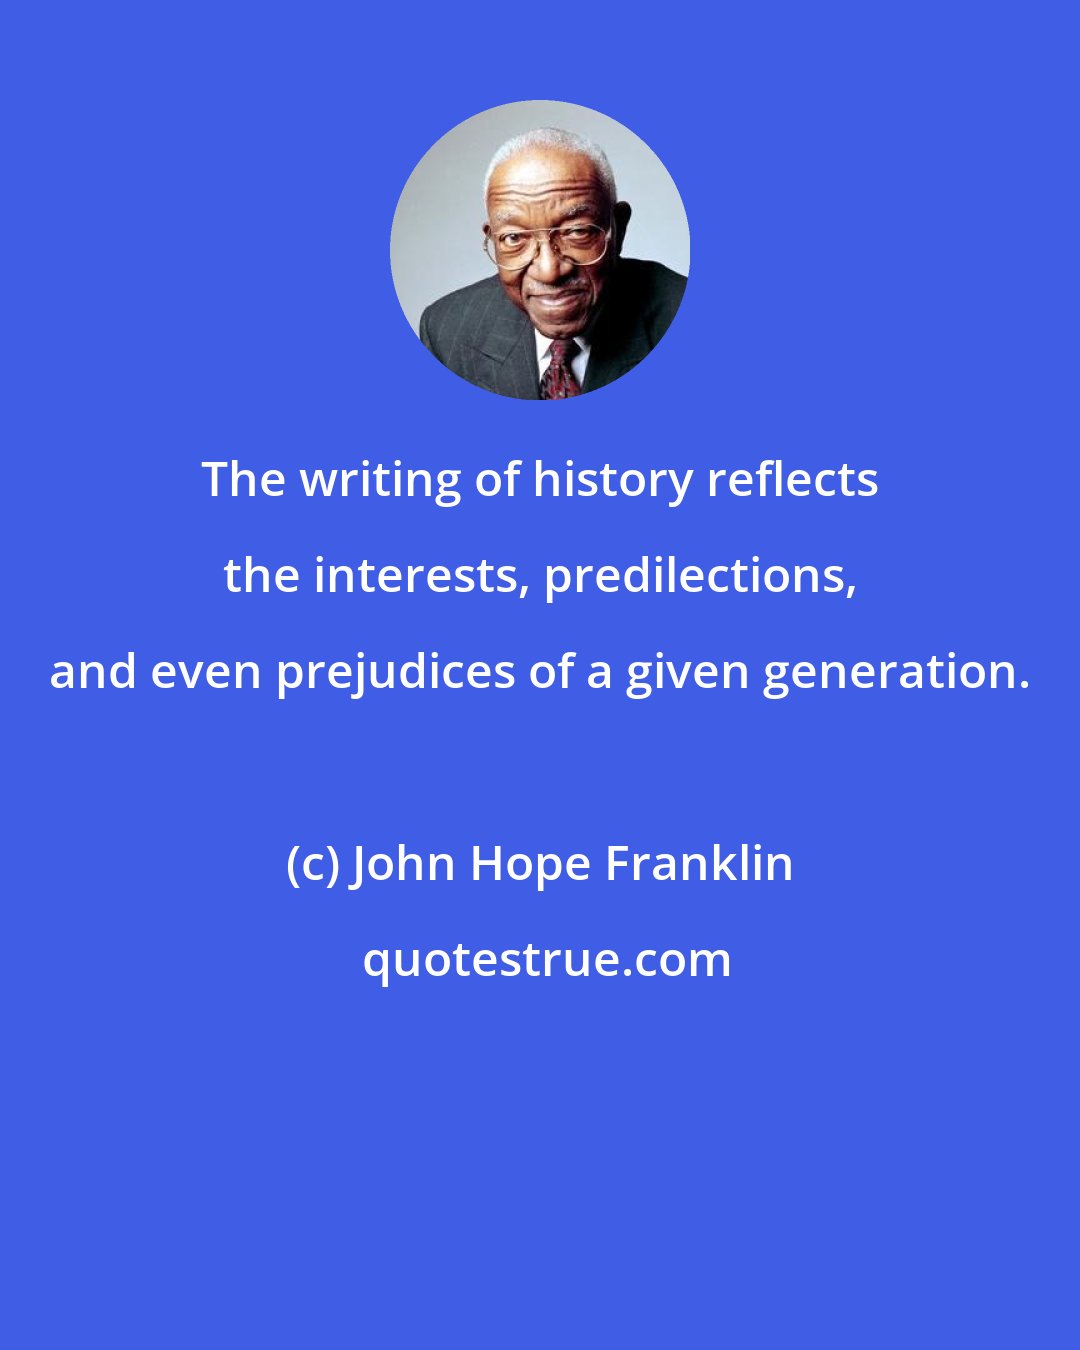 John Hope Franklin: The writing of history reflects the interests, predilections, and even prejudices of a given generation.